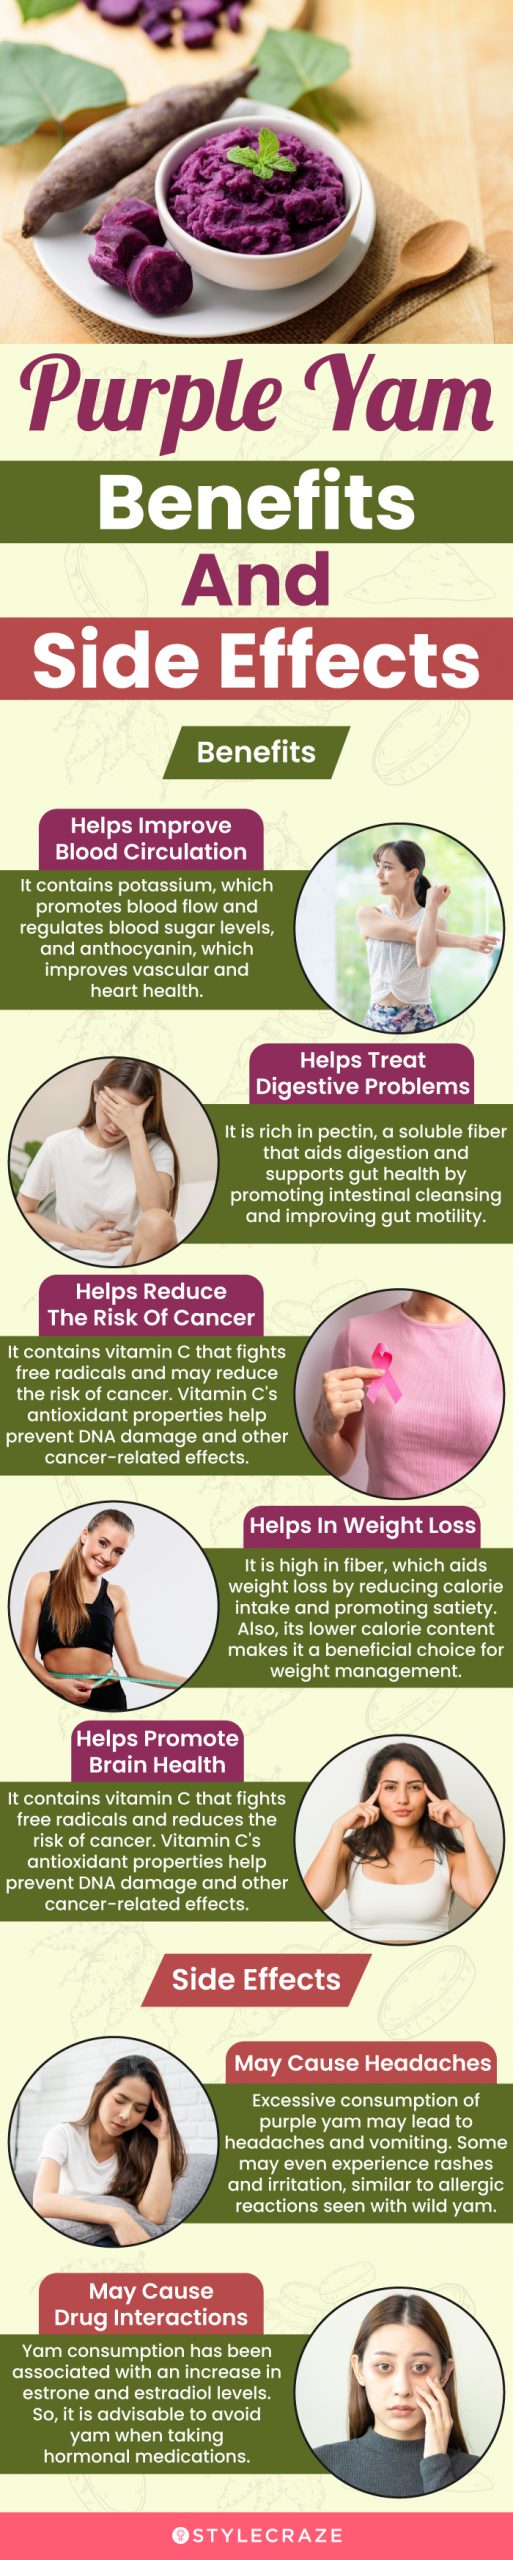 purple yam benefits and side effects(infographic)